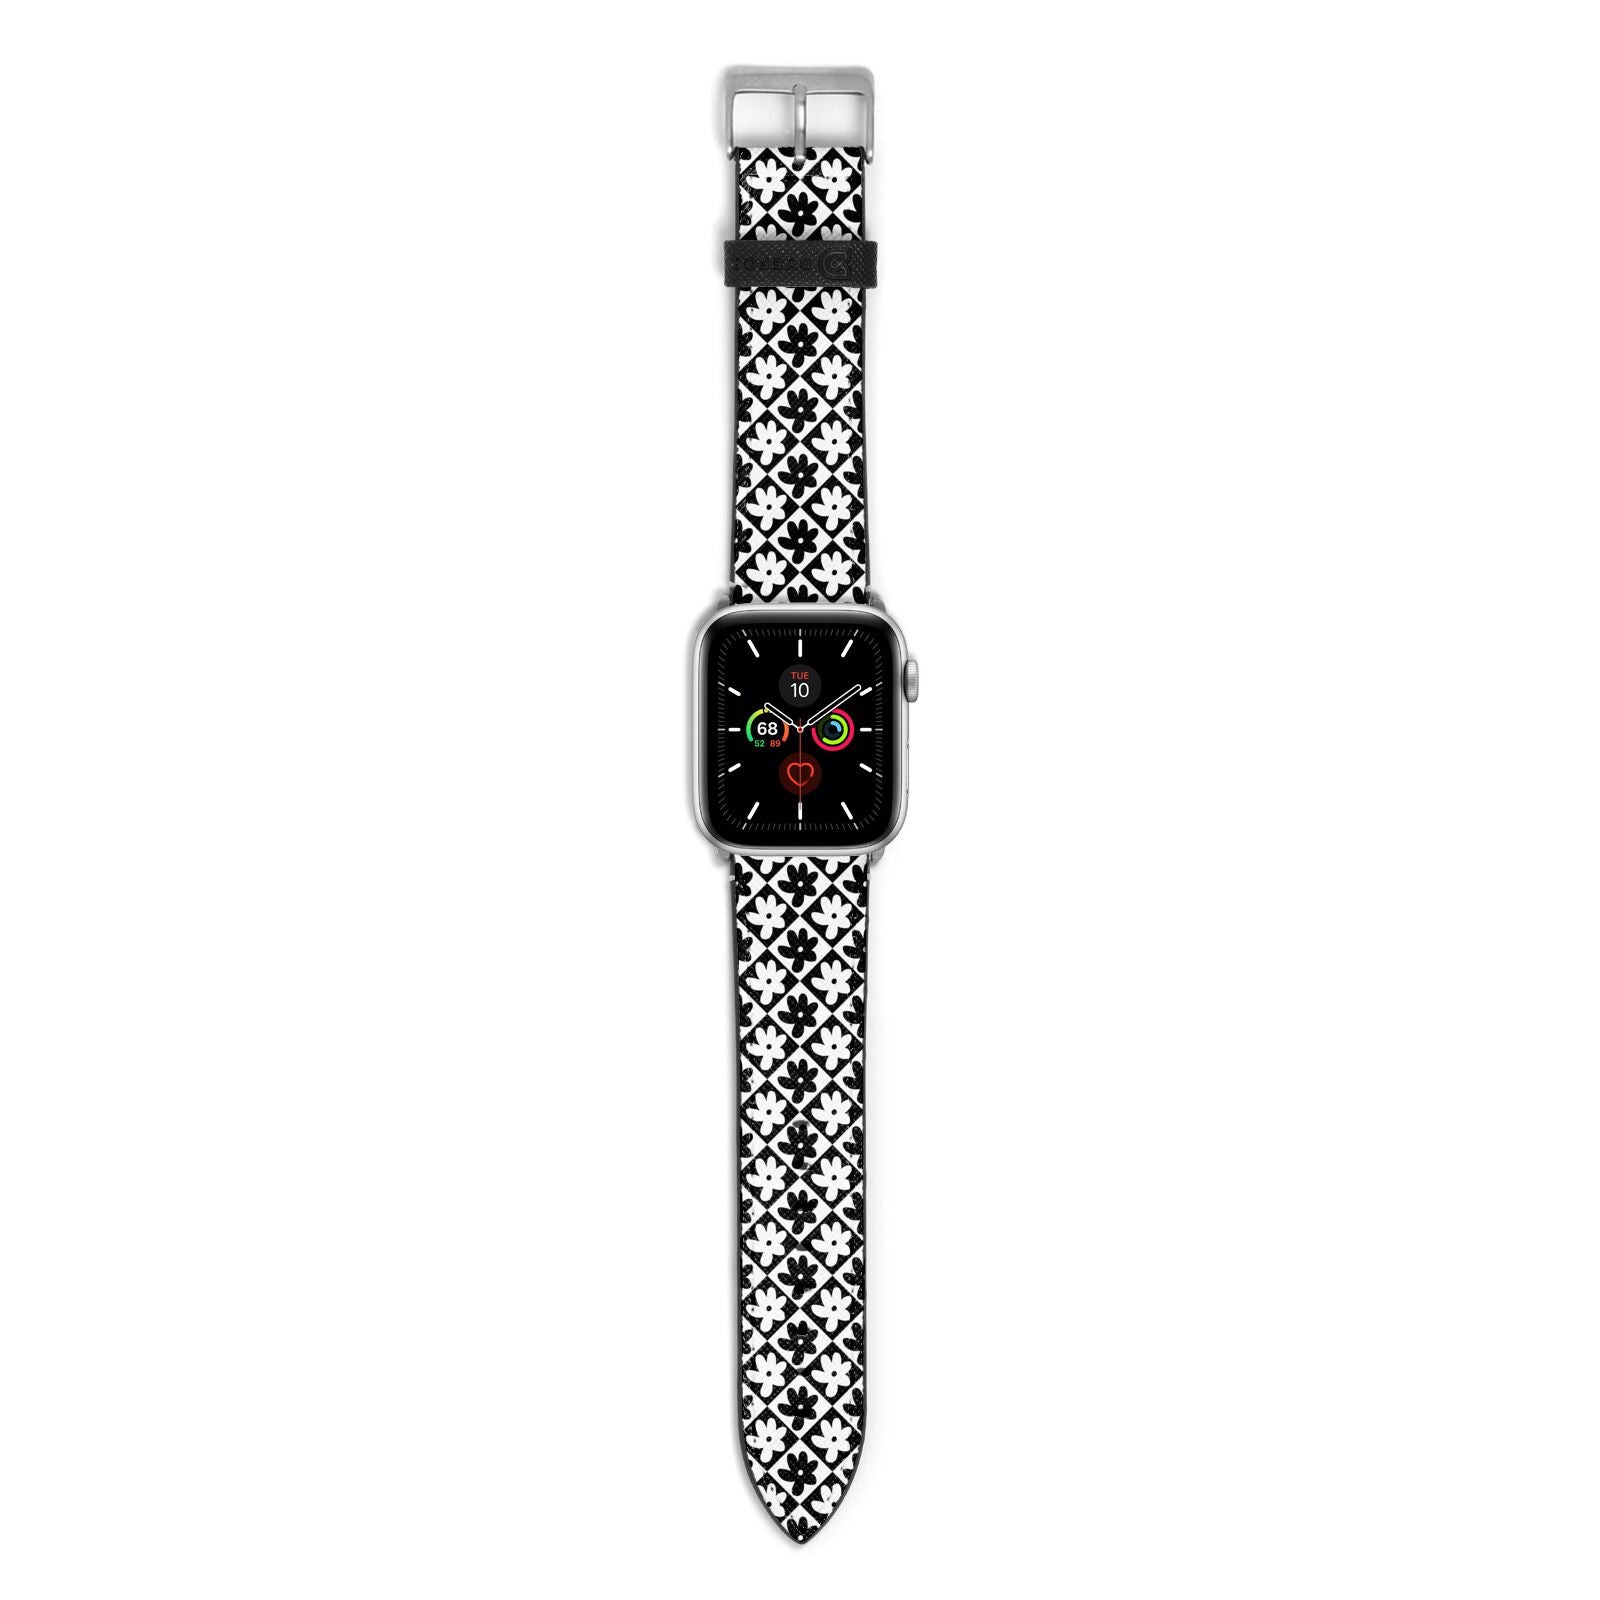 Check Flower Apple Watch Strap with Silver Hardware